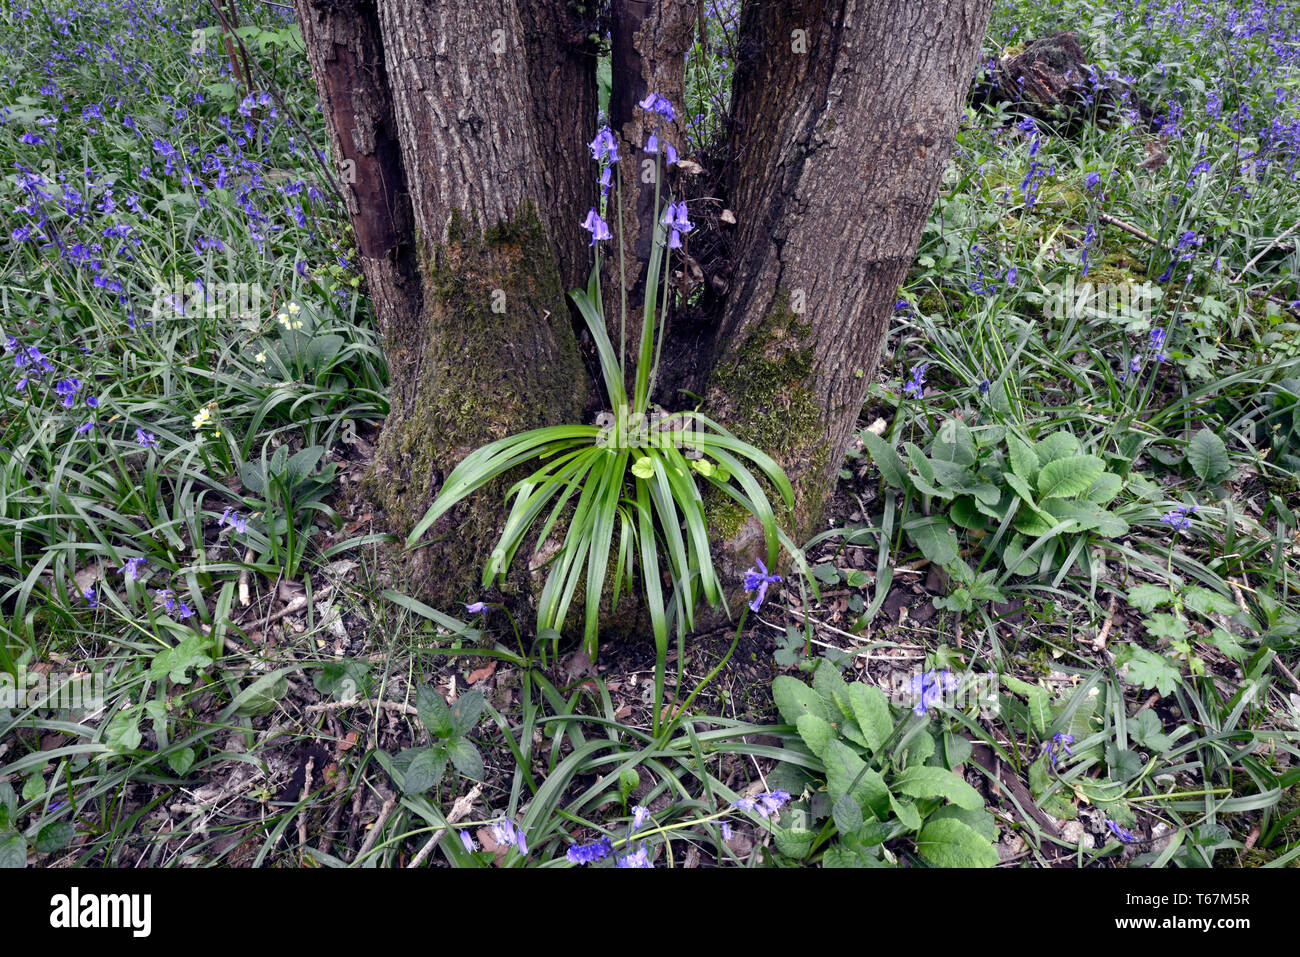 Bluebell plant nestled in tree trunk in the forest of the ancient woodland at Waresley Wood, Great Gransden, Cambridgeshire, England Stock Photo